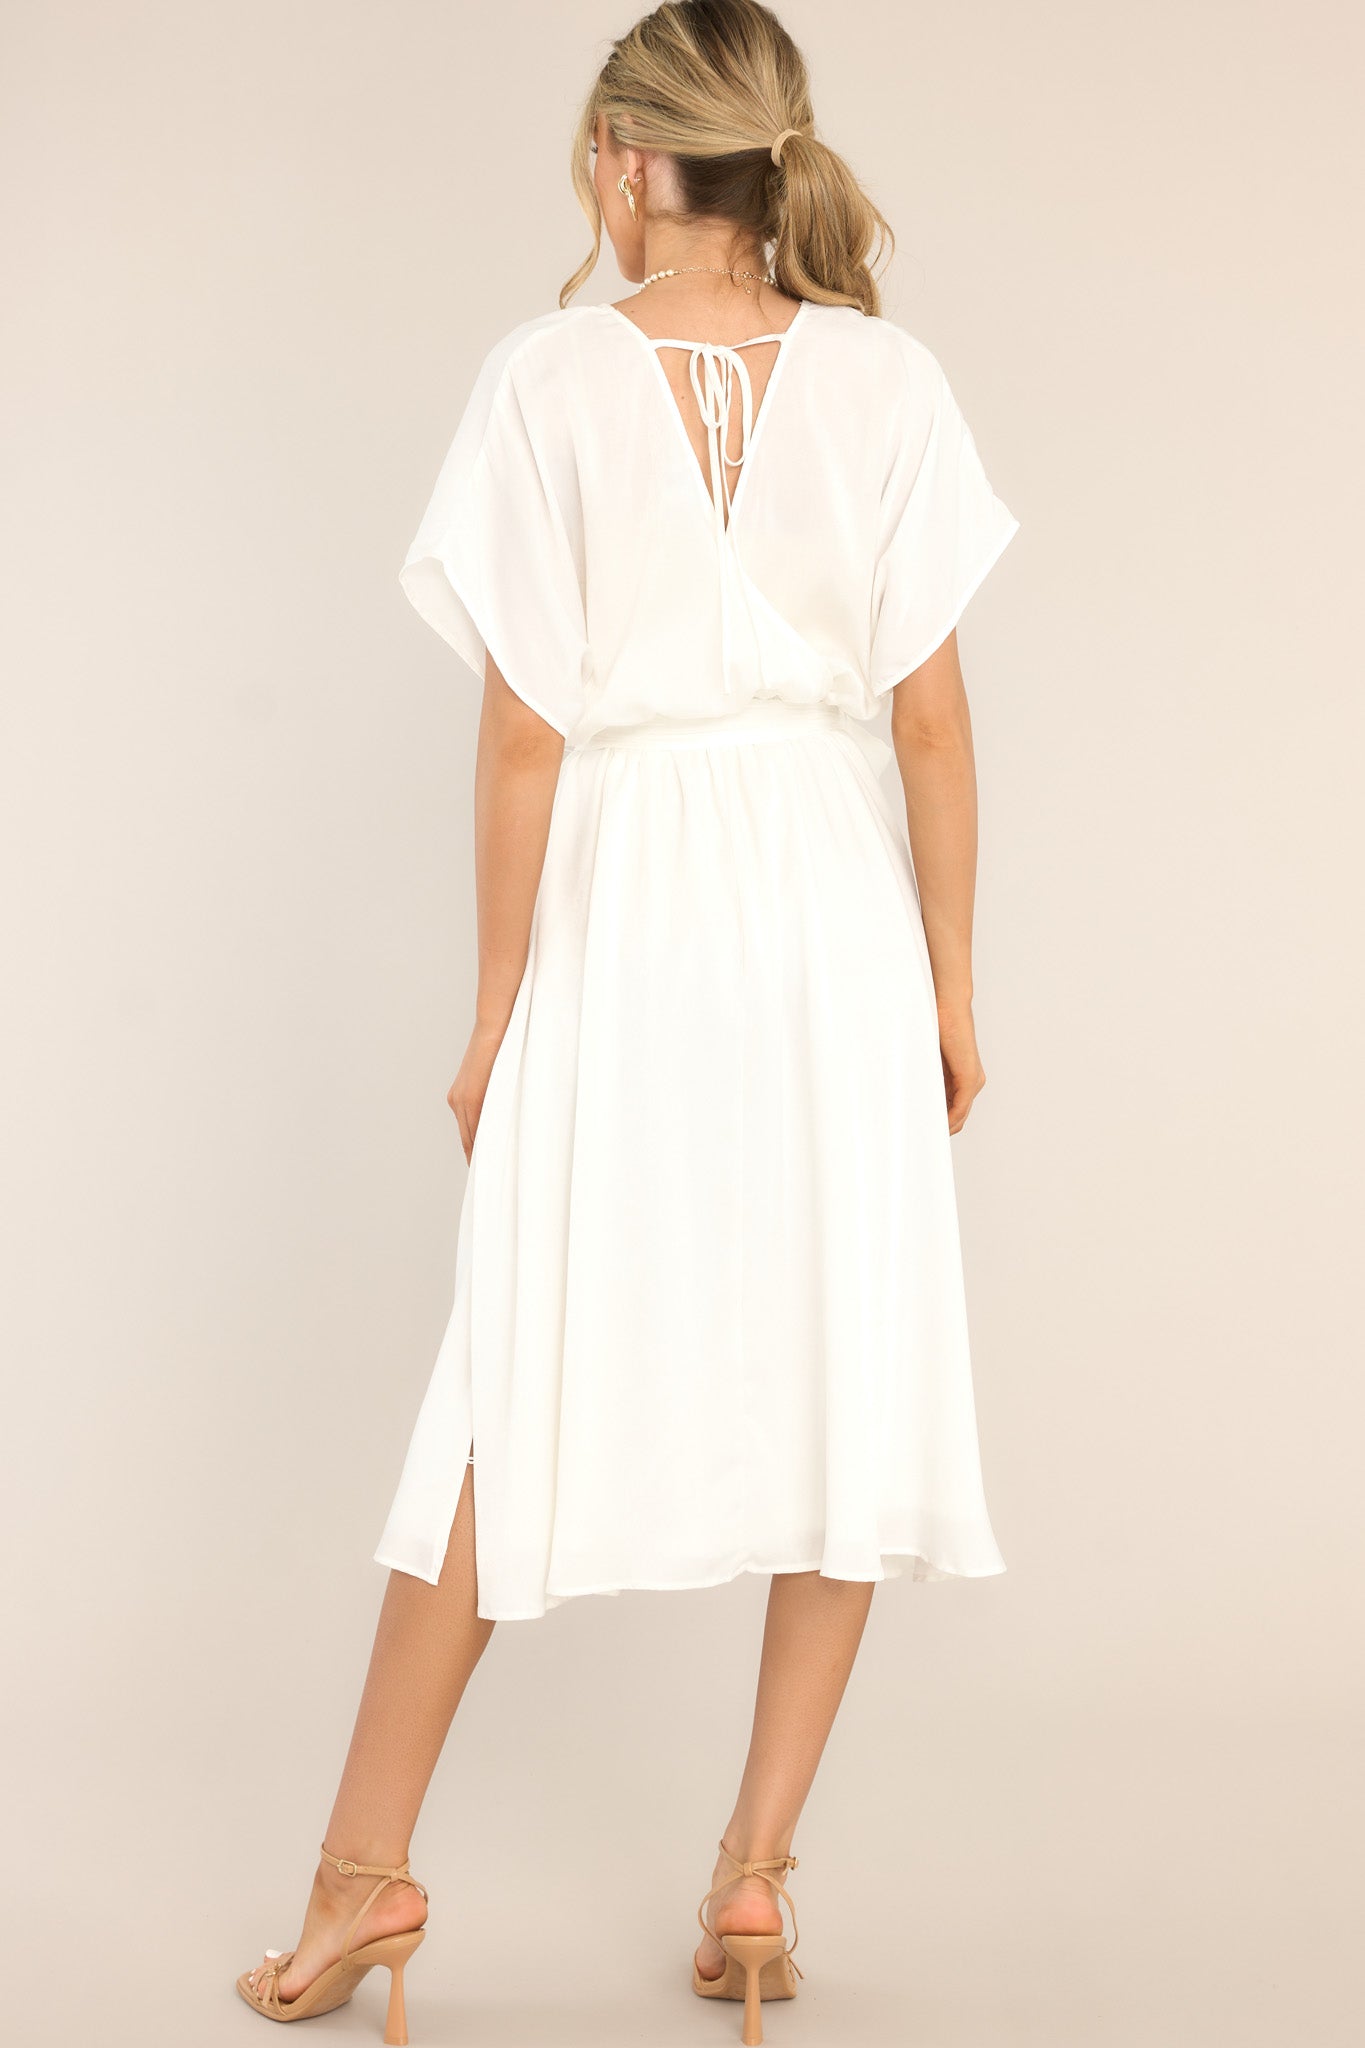 Back view of this midi dress that features a V-neckline, an open back with a self-tie closure, flowy cap sleeves, an elastic waistband with a self-tie fabric belt, and button detailing down the side of the skirt.